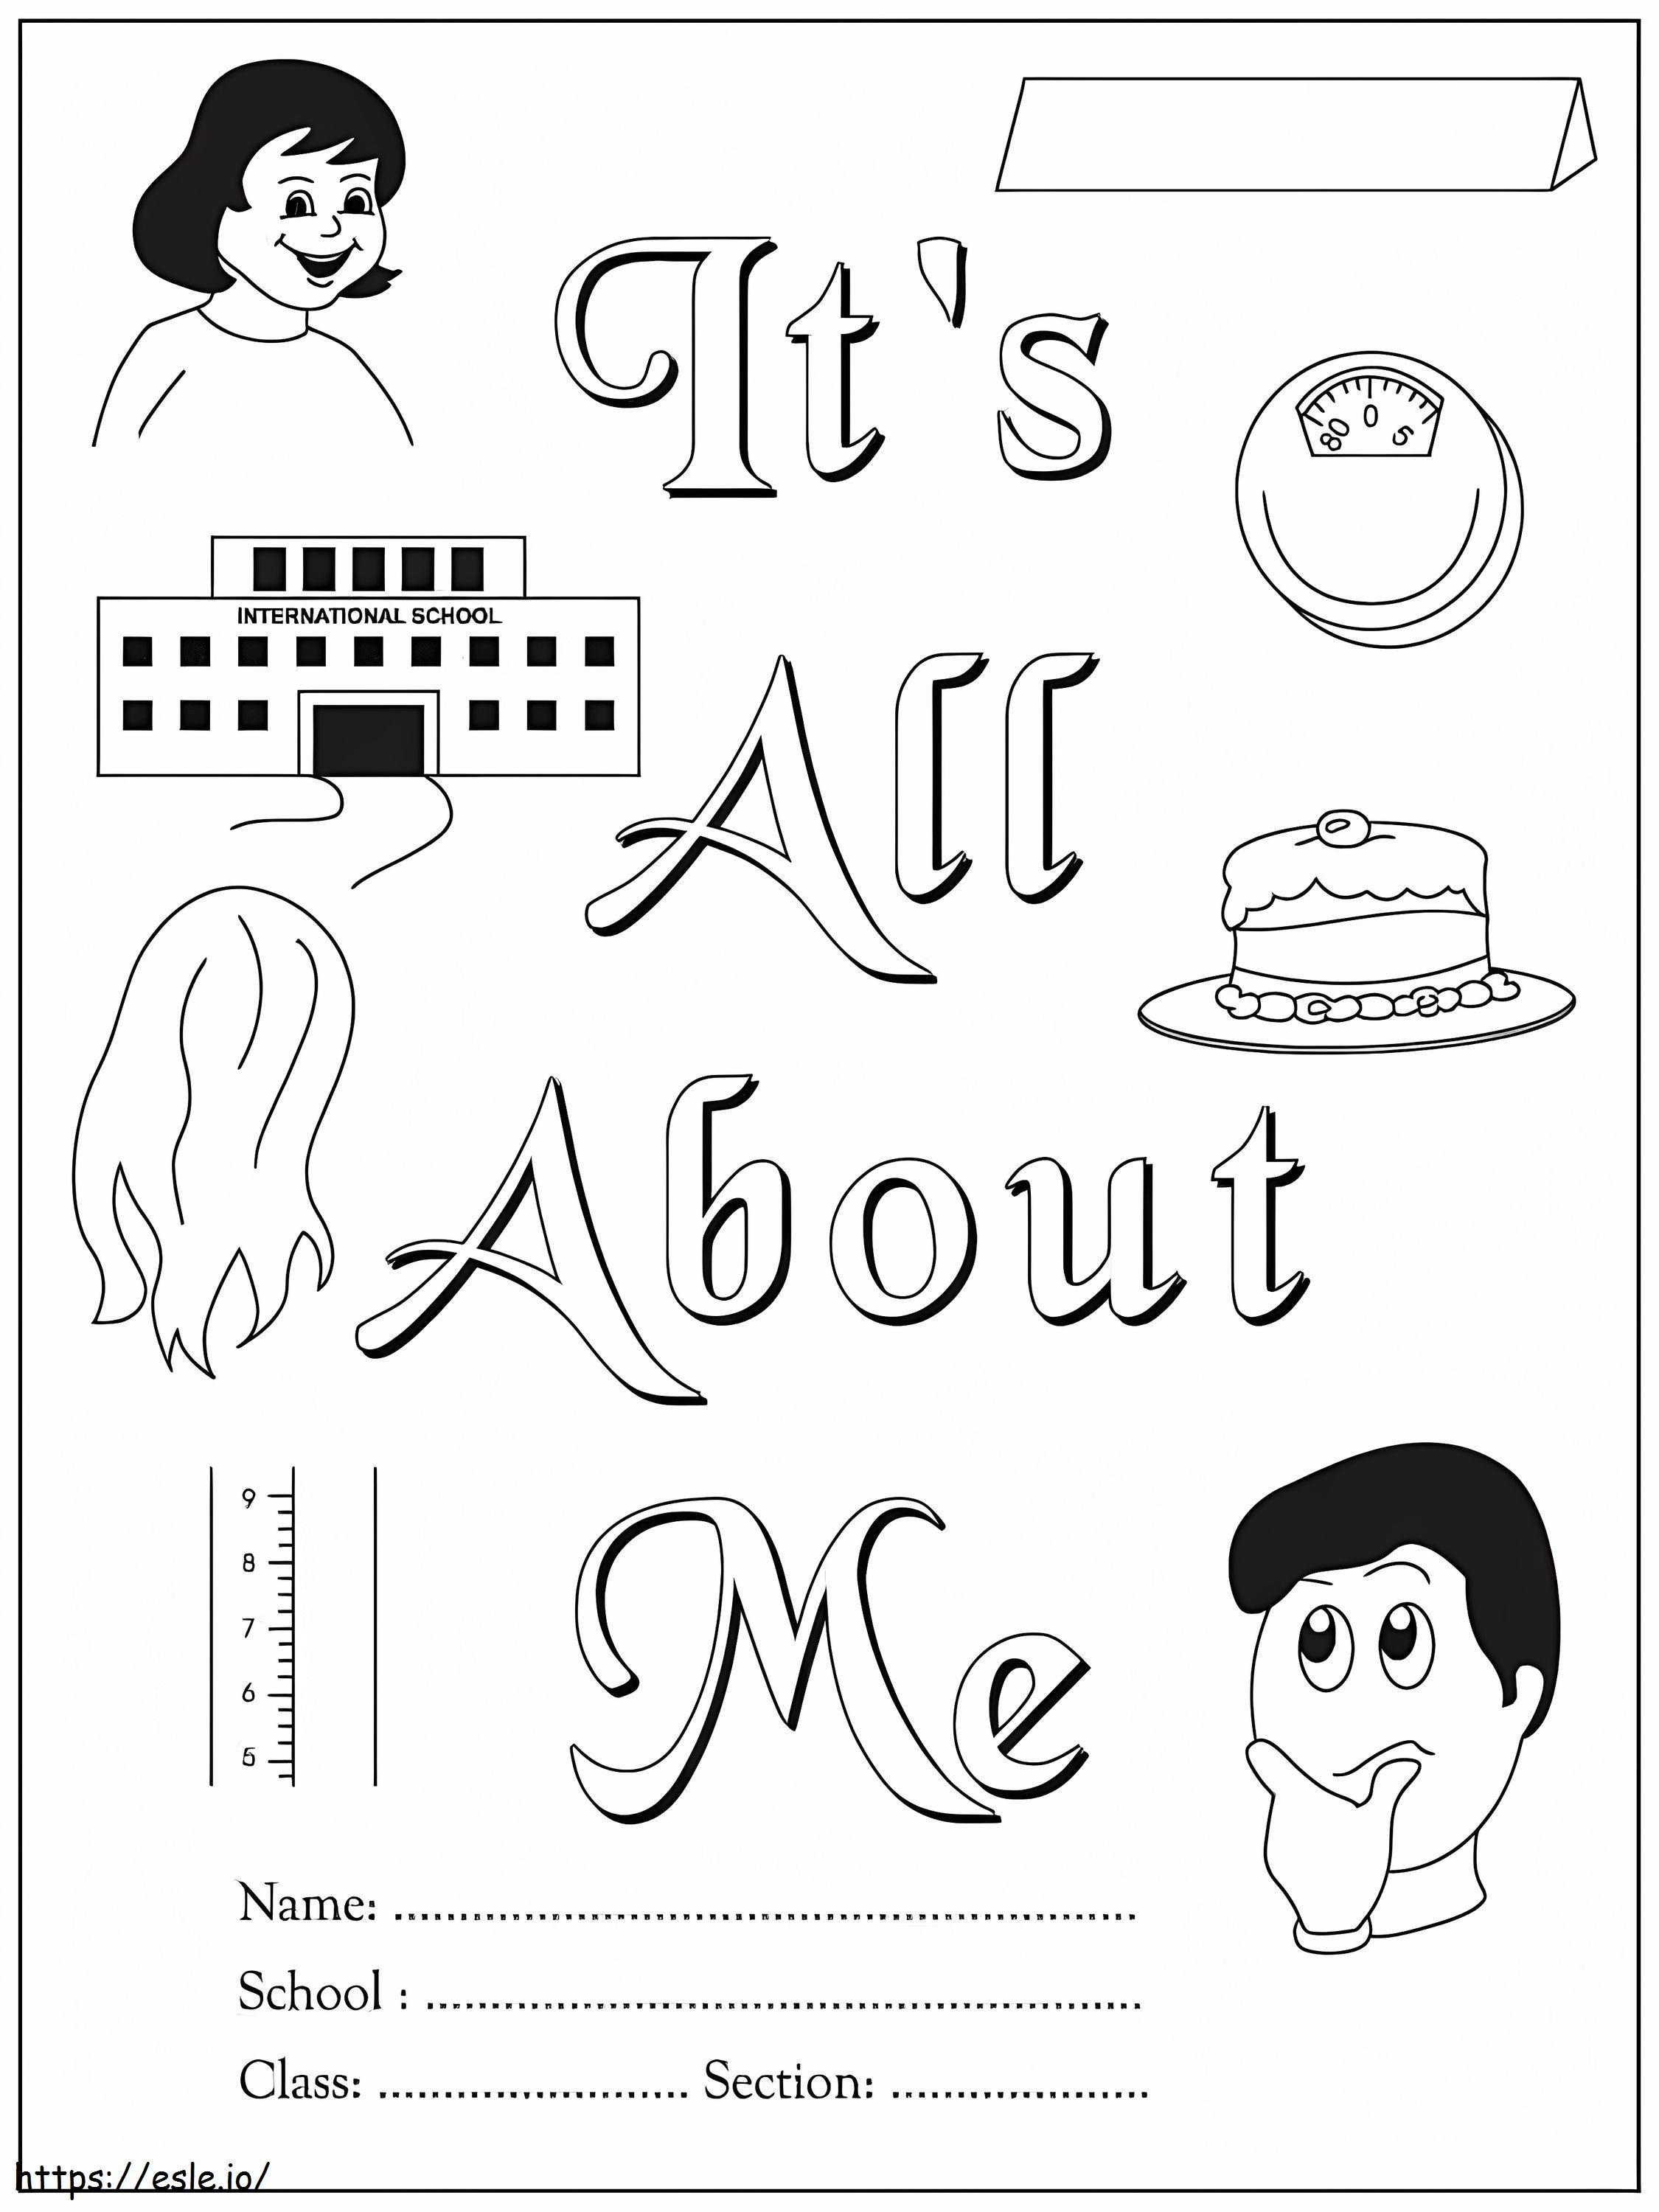 Its All About Me coloring page